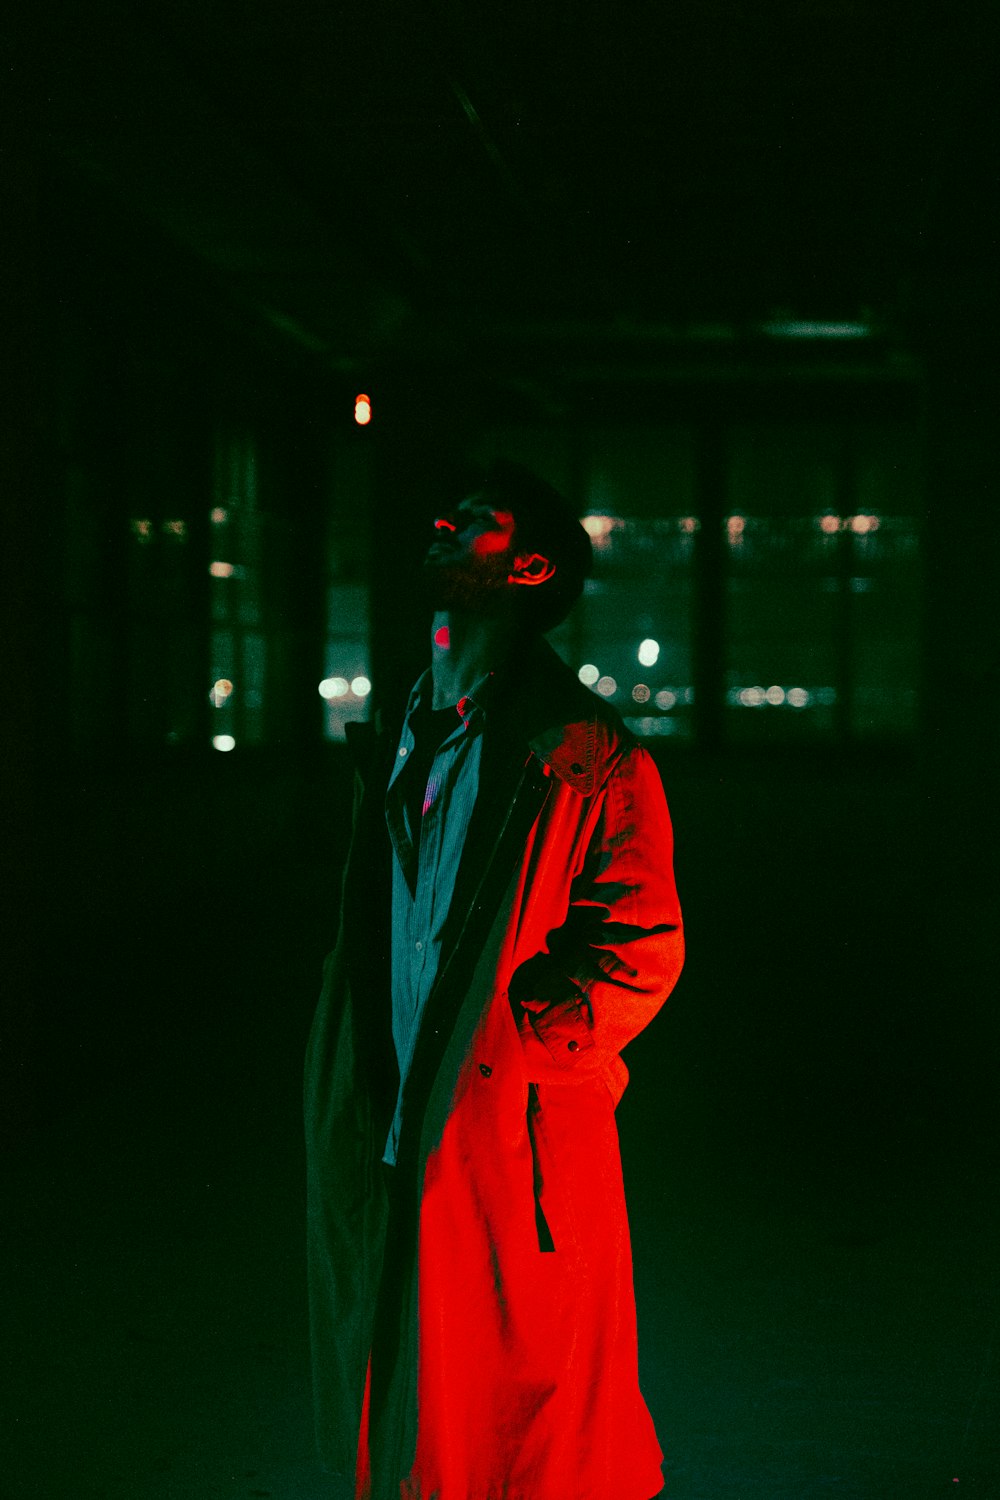 a man standing in the dark wearing a red coat